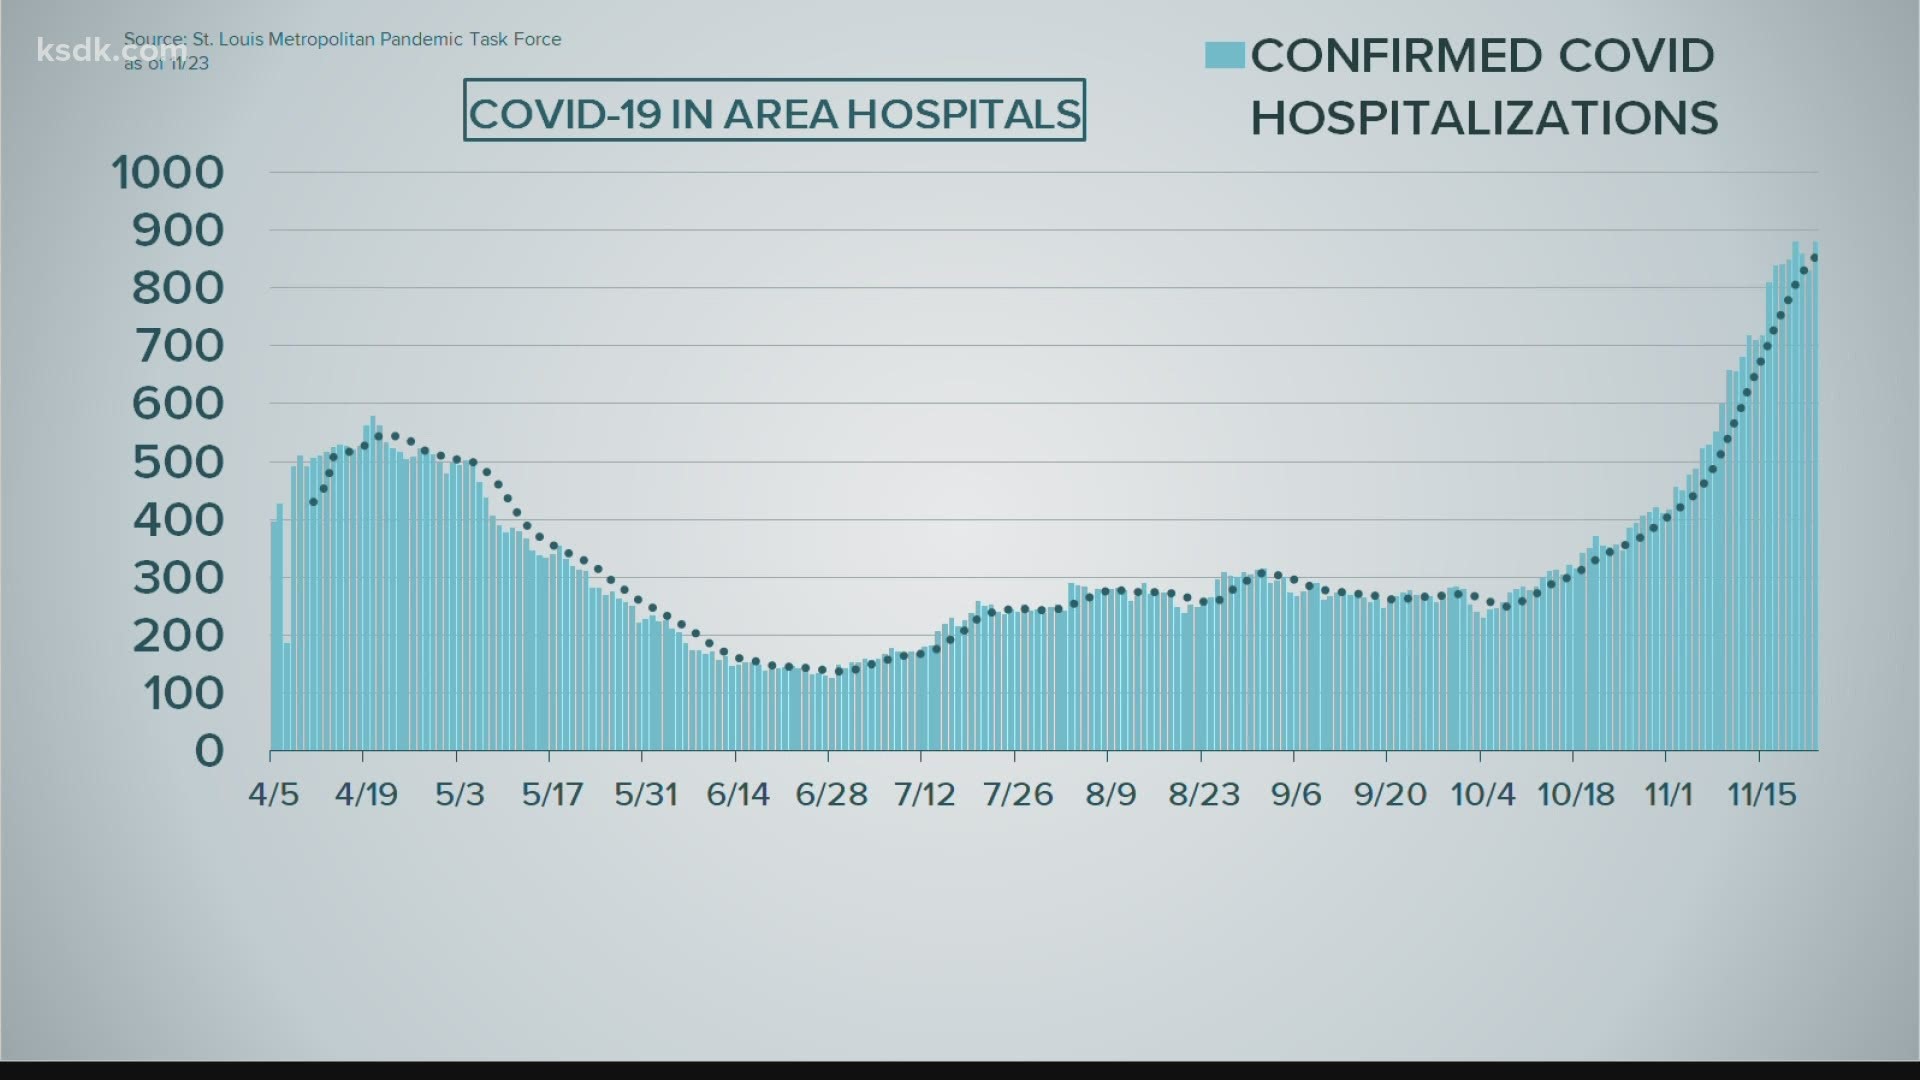 Yesterday, there was a total of 881 COVID patients in area hospitals with COVID-19